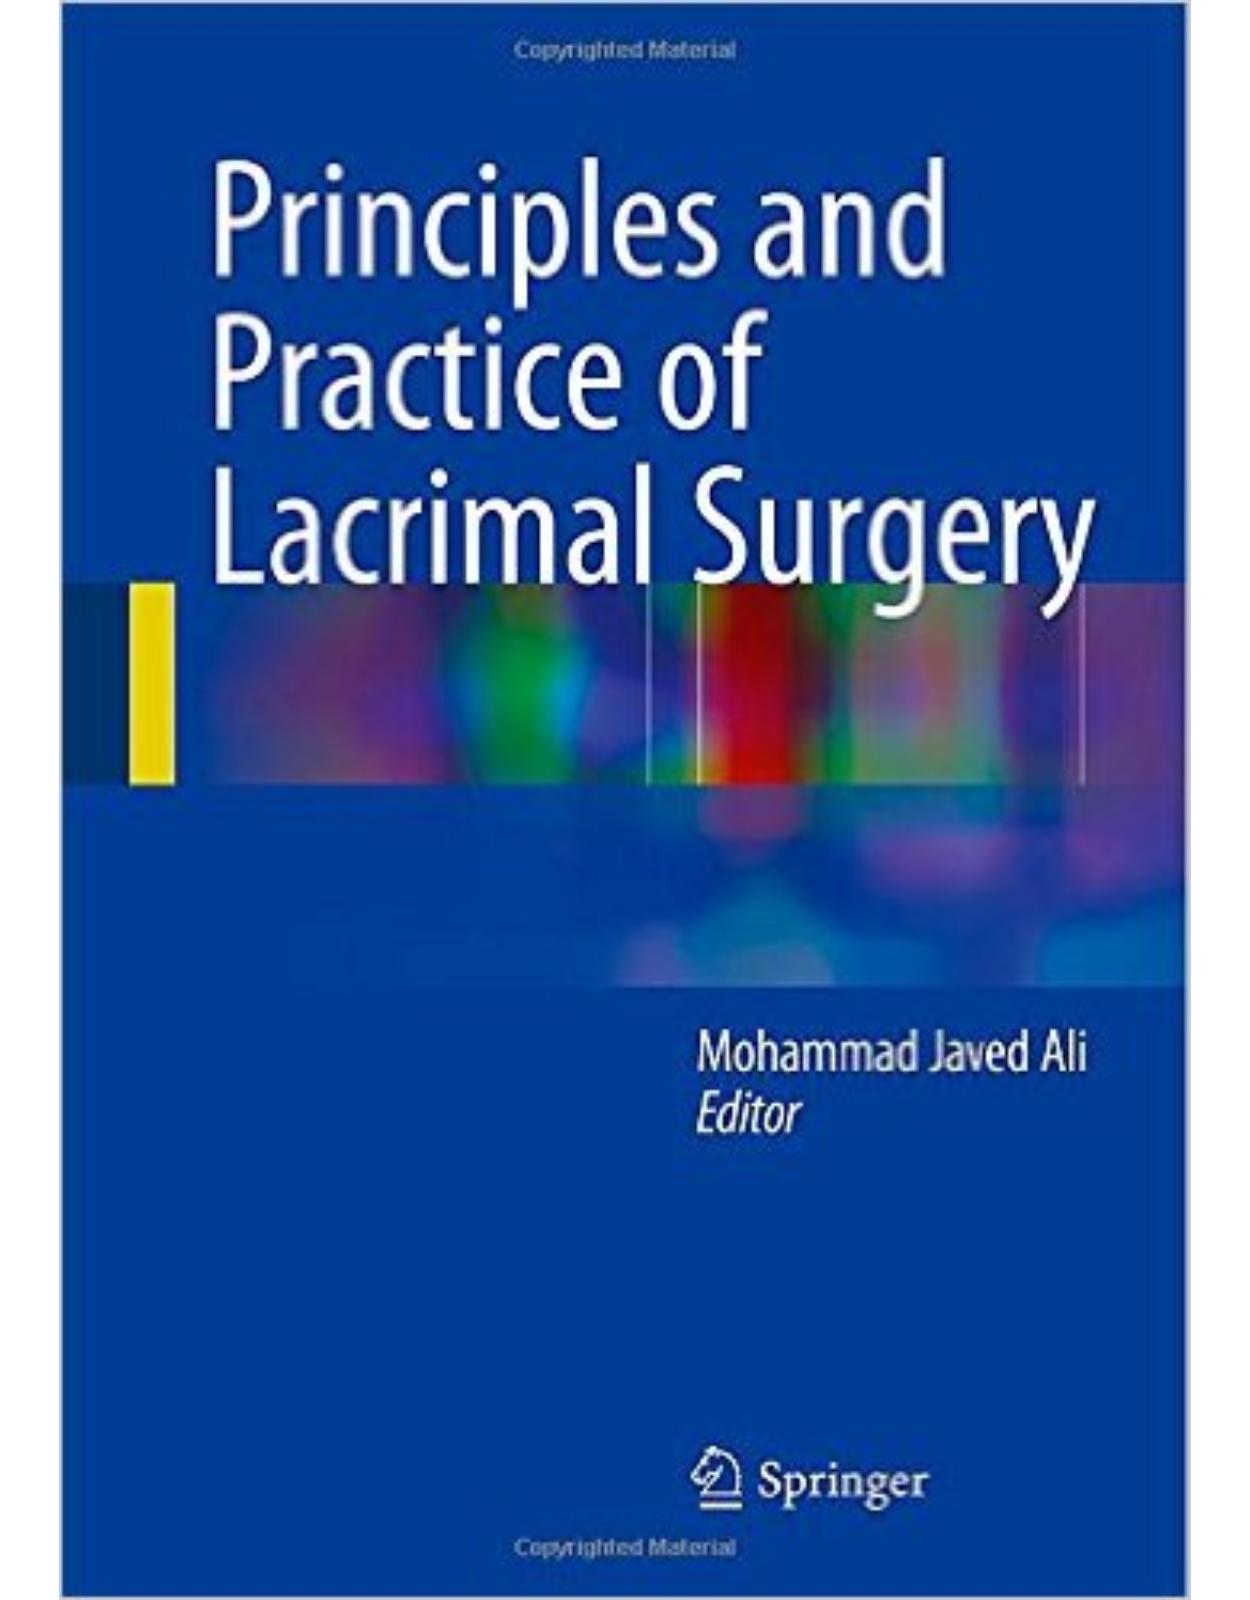 Principles and Practice of Lacrimal Surgery 2015th Edition